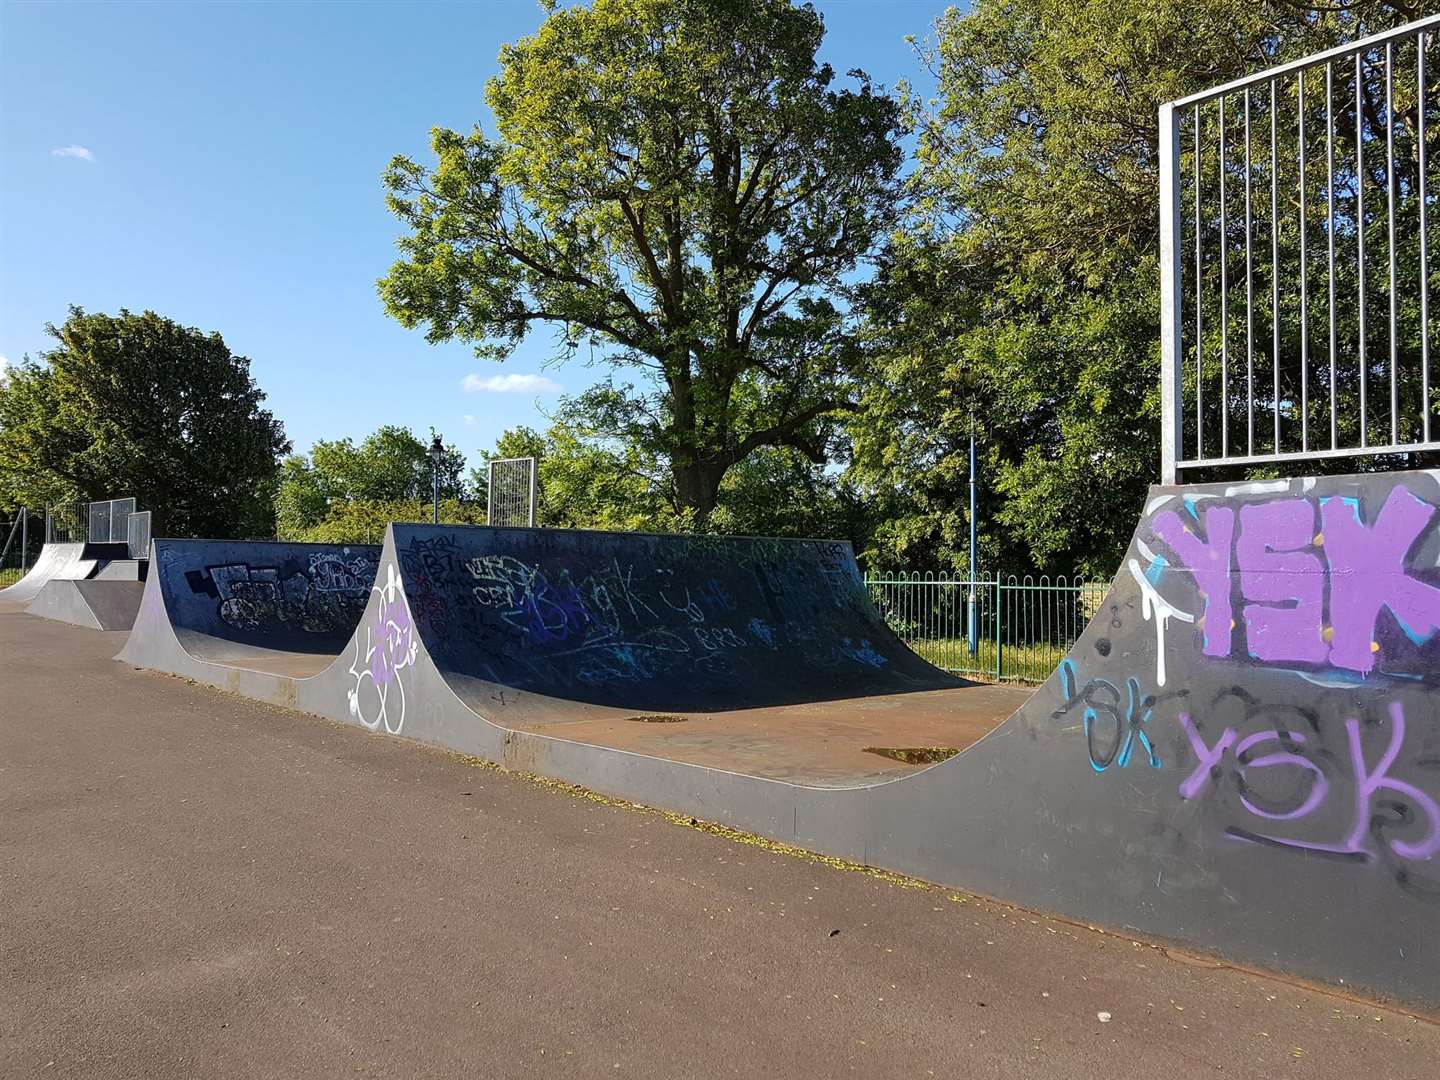 The existing facilities at Swanley skate park at St Mary's Recreation Ground